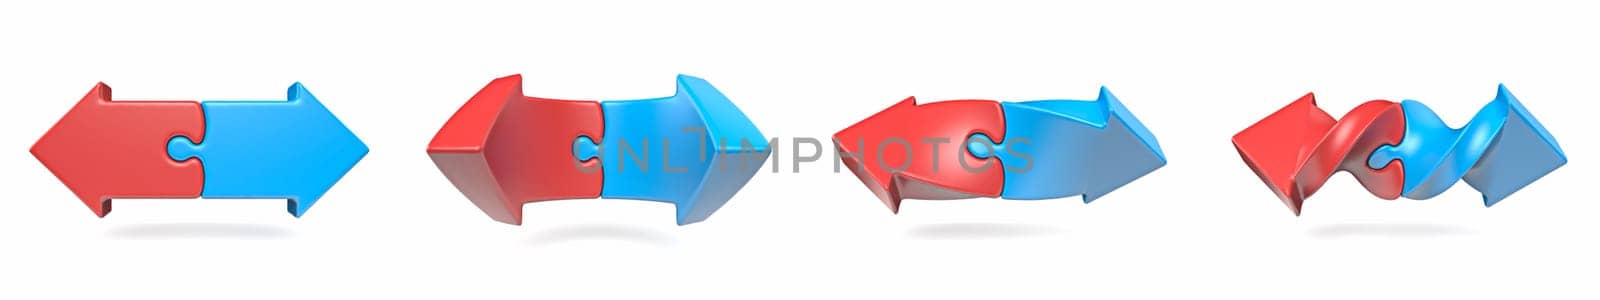 Two head puzzle red blue arrows 3D rendering illustration isolated on white background